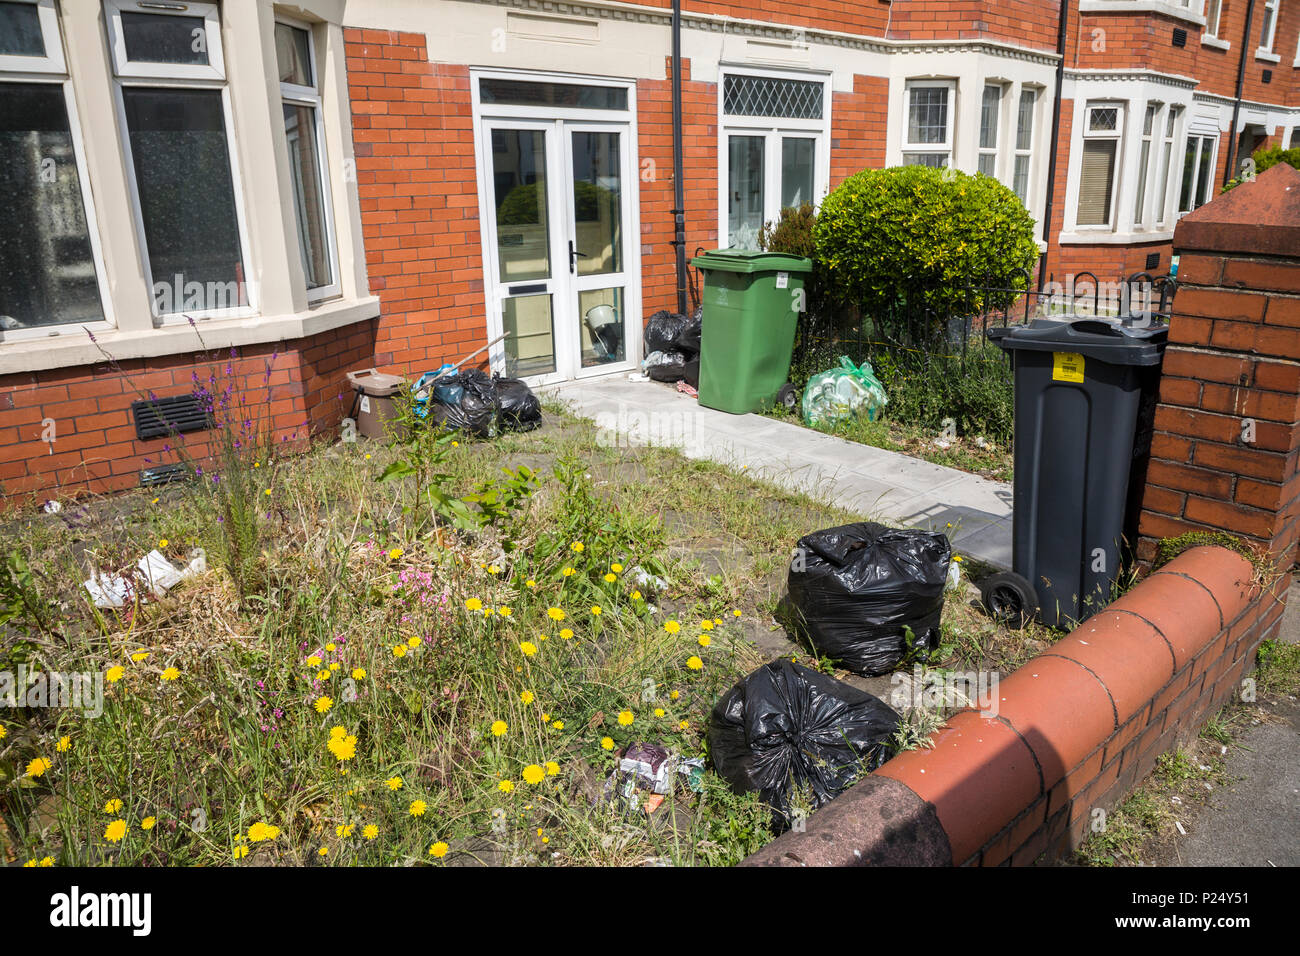 Overgrown garden with rubbish bags and litter, Cardiff, Wales, UK Stock Photo